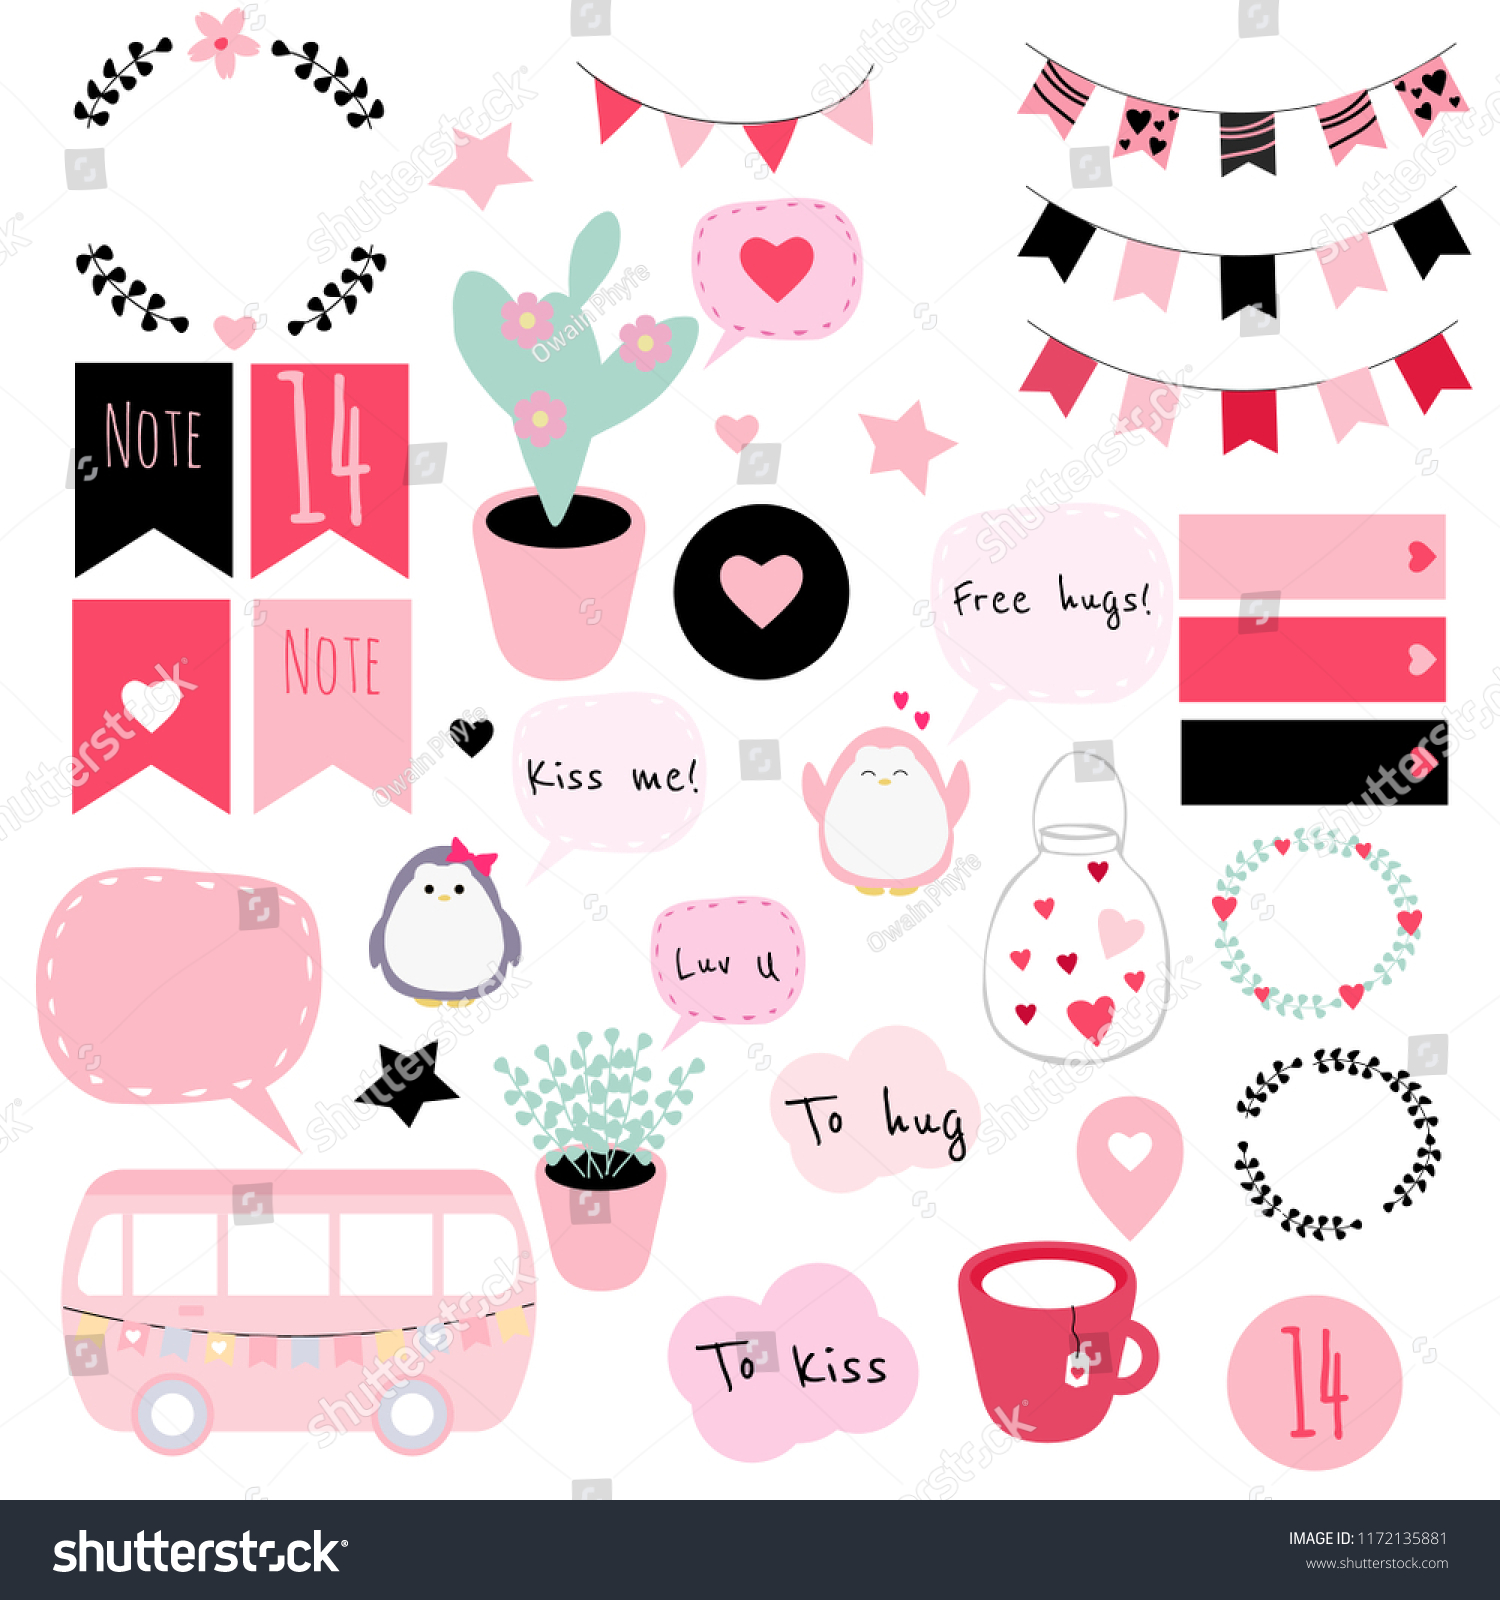 Big set of vector stickers in Valentine's Day theme. Good for patches, scrapbooking, planners, bullet journals, etc. #1172135881